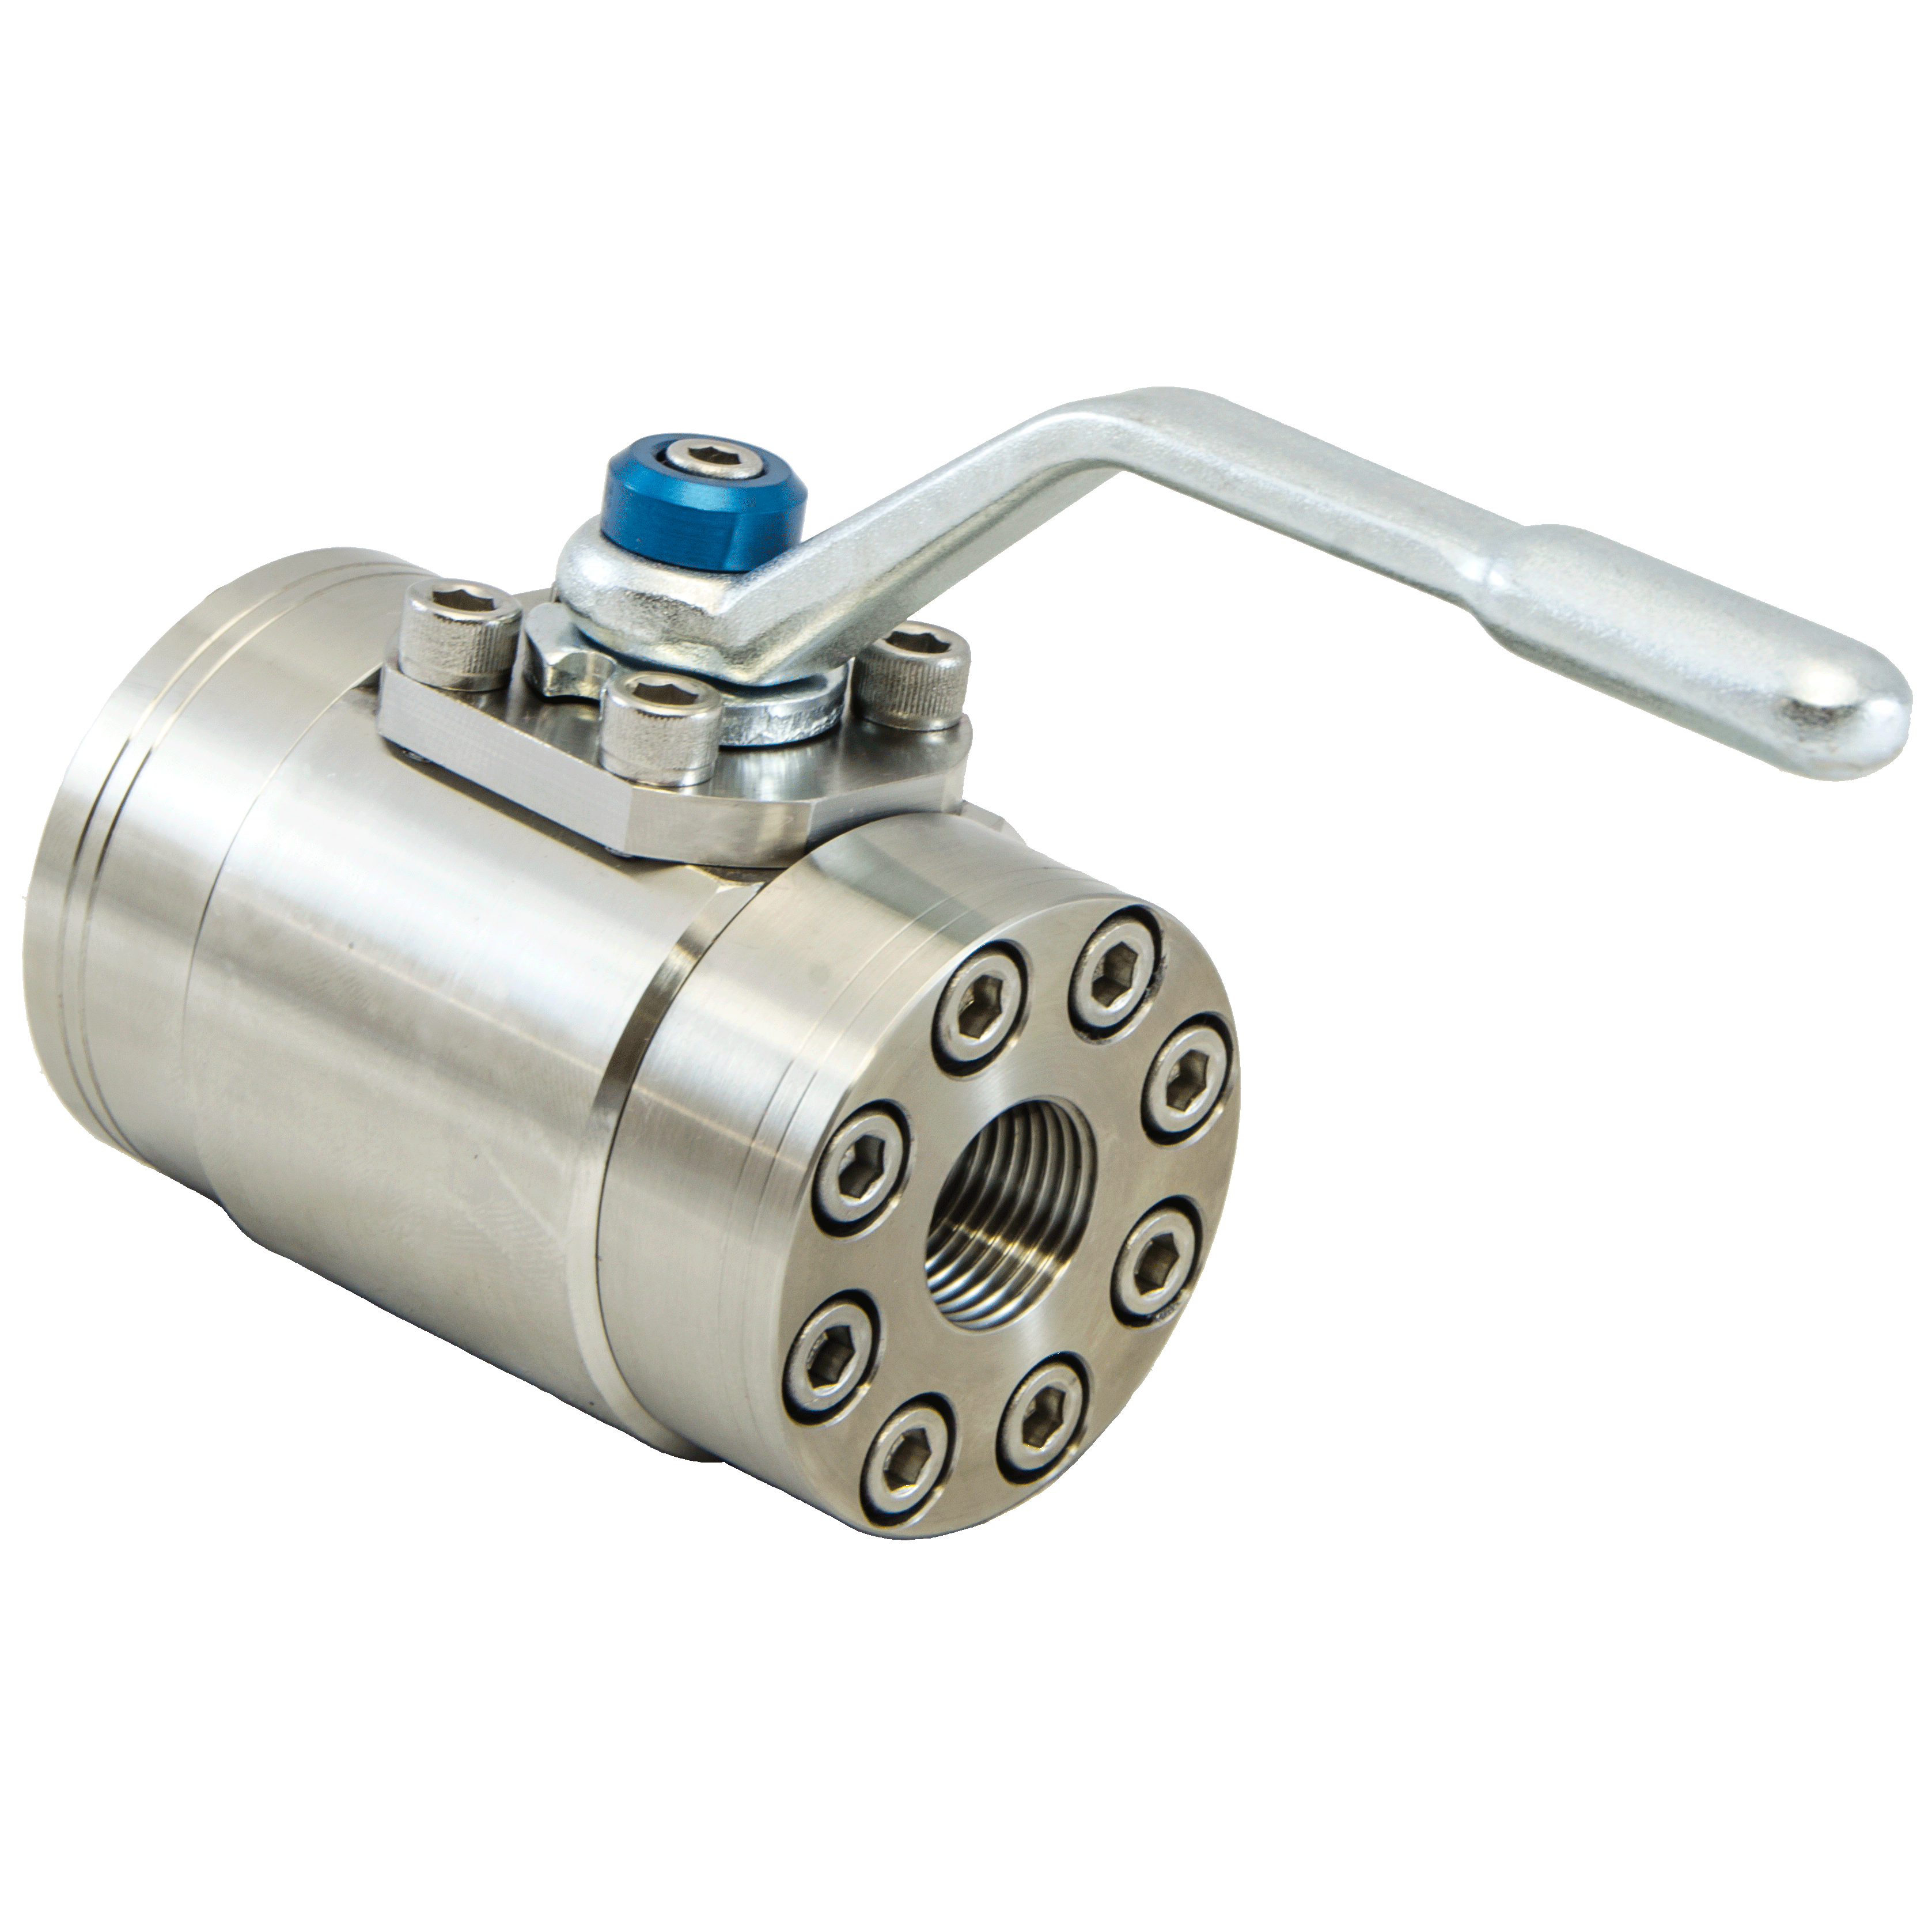 BVQG-1500S-2211 : DMIC Stainless Gas Ball Valve, #24 SAE (1.5), 316 Stainless Steel, 6000psi, Two-Way